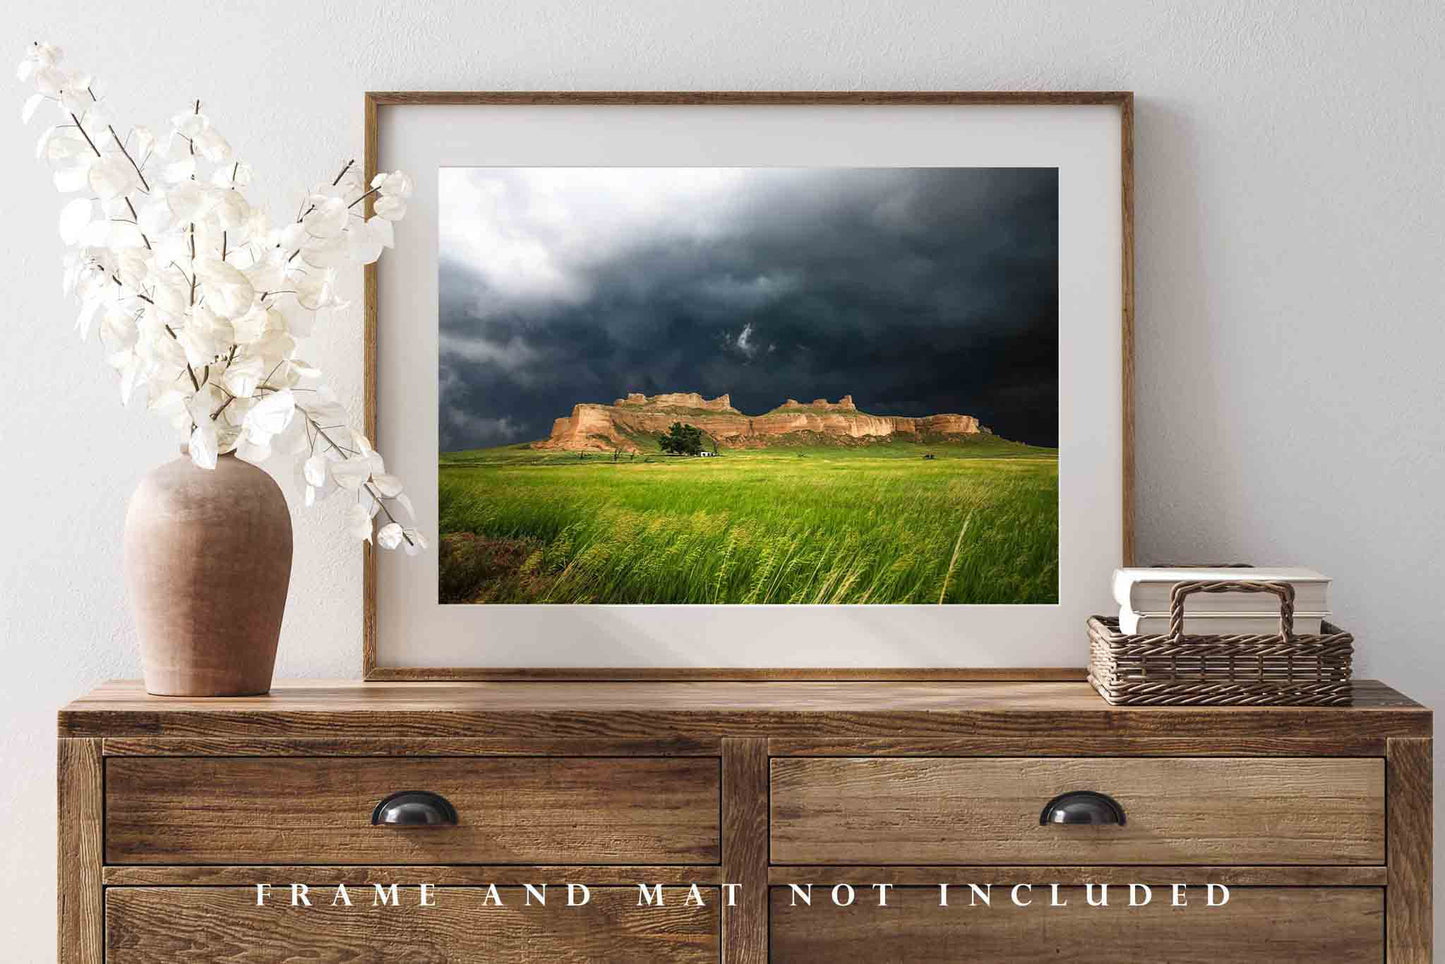 Western Landscape Photography Wall Art Print - Picture of Bluff in Stormy Sky Along Wrights Gap Road in Nebraska Panhandle Prairie Decor